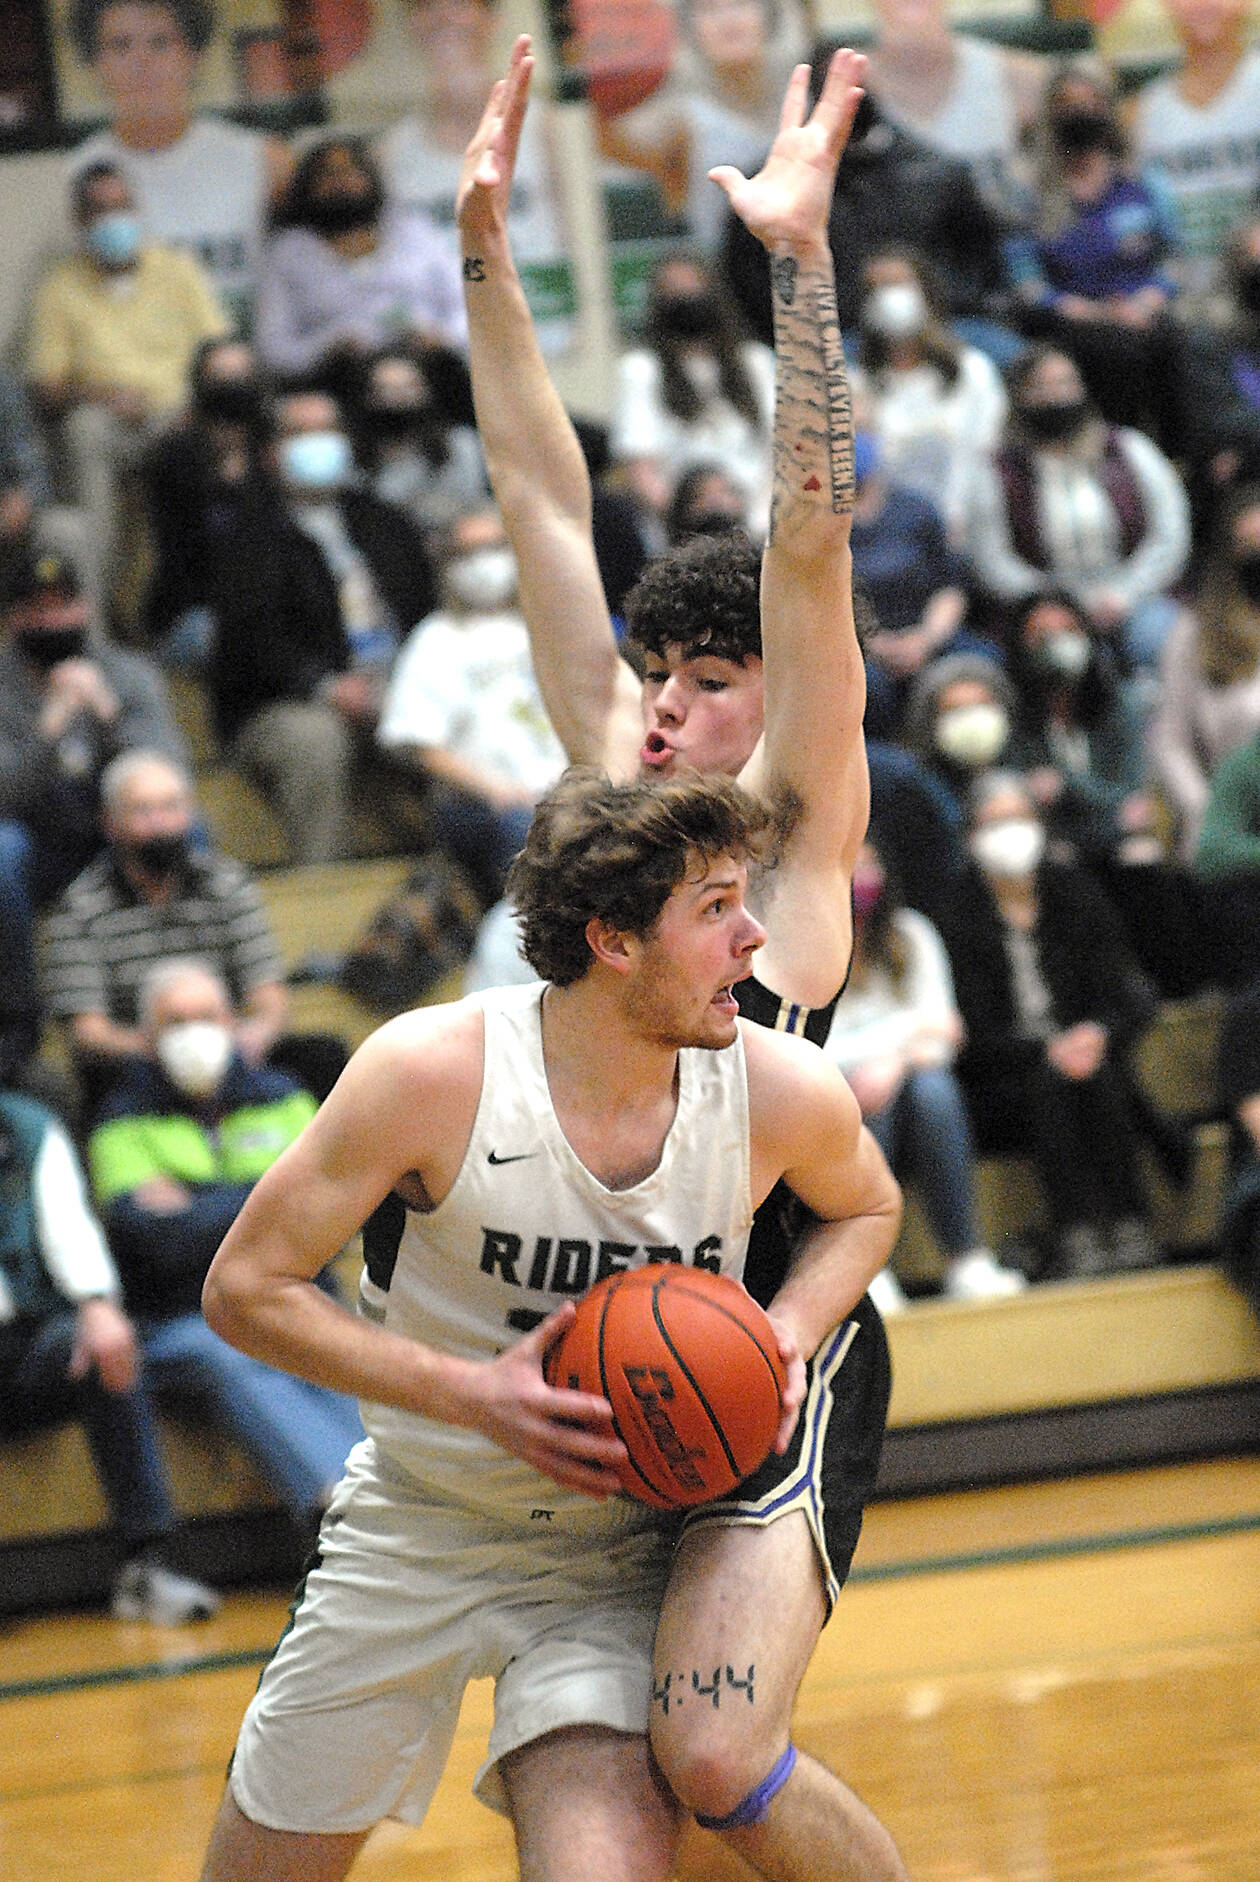 Keith Thorpe/Peninsula Daily News Port Angeles’ Wyatt Dunning, front, tries to evade the defense of North Kitsap’s Jonas La Tour during Thursday night’s game at Port Angeles High School.